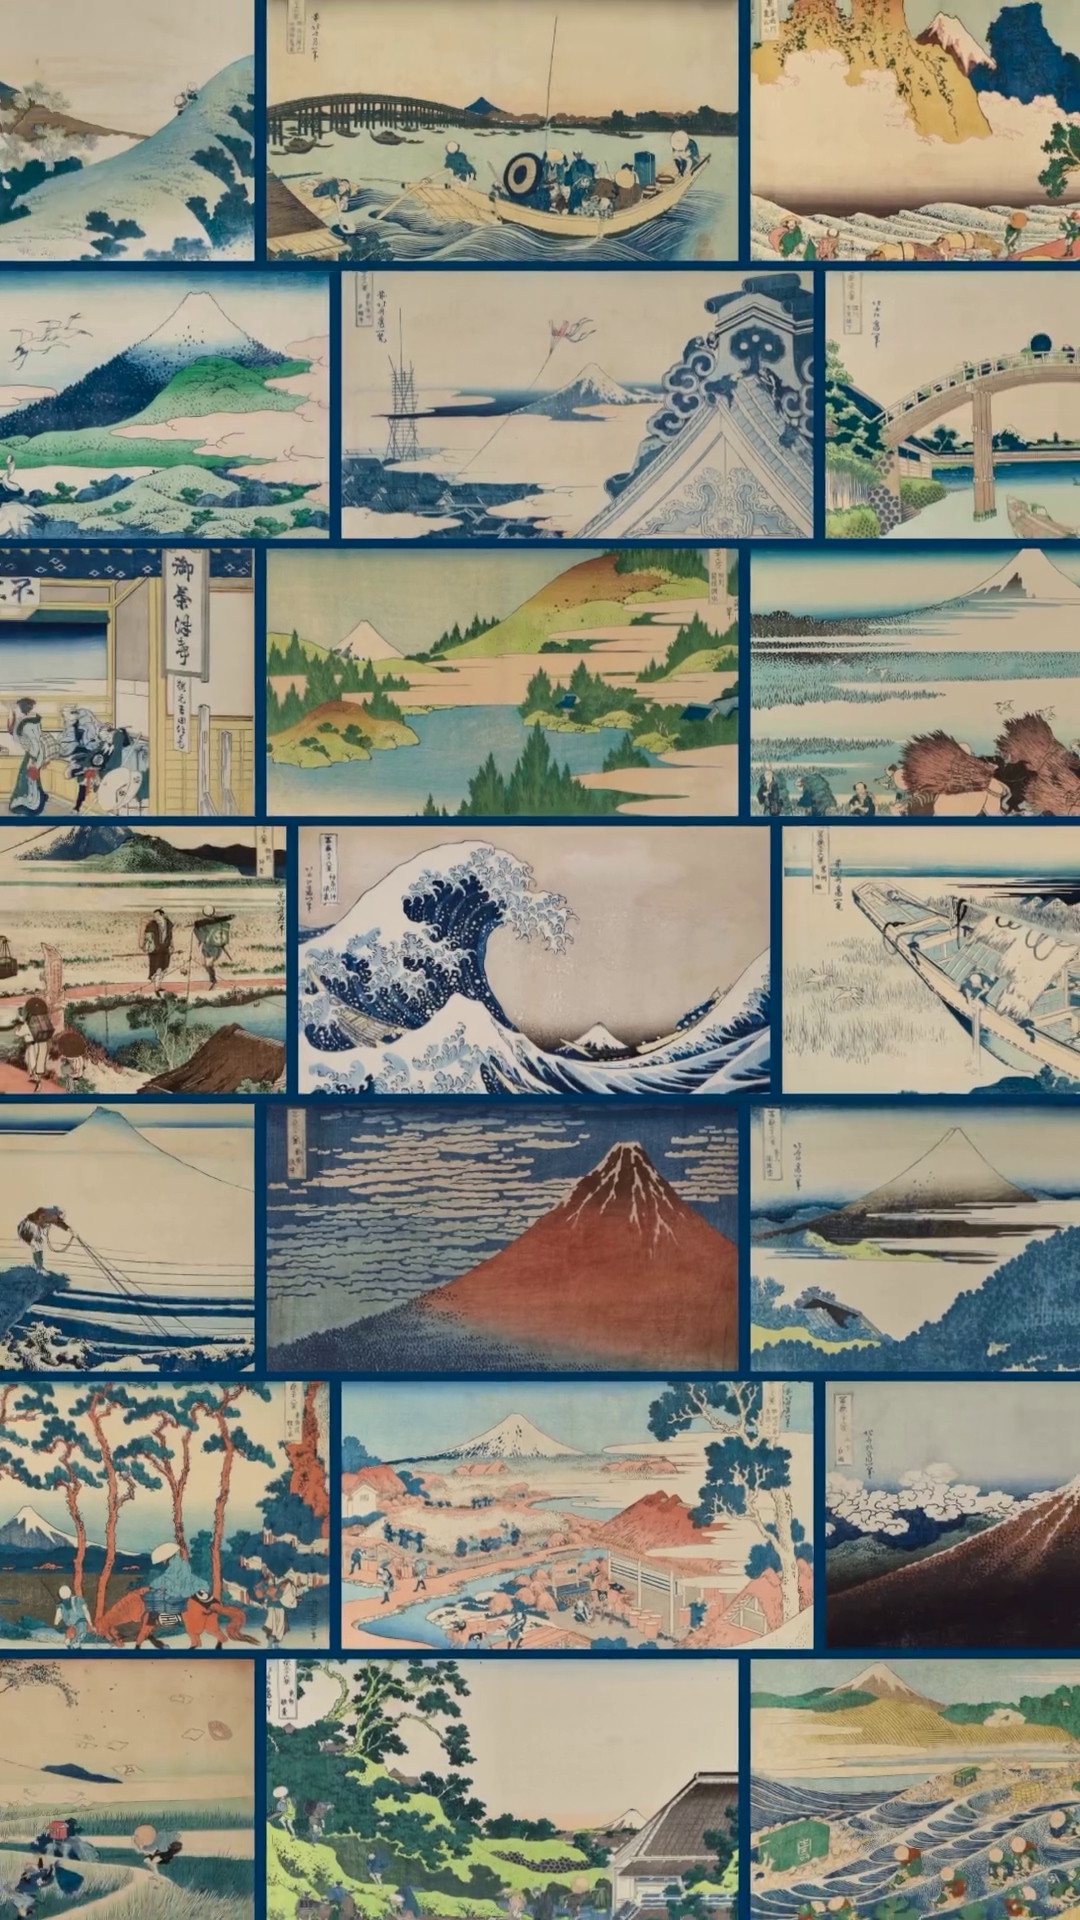 Christie's New York auctioned a complete set of Hokusai's 36 Views of Mount Fuji